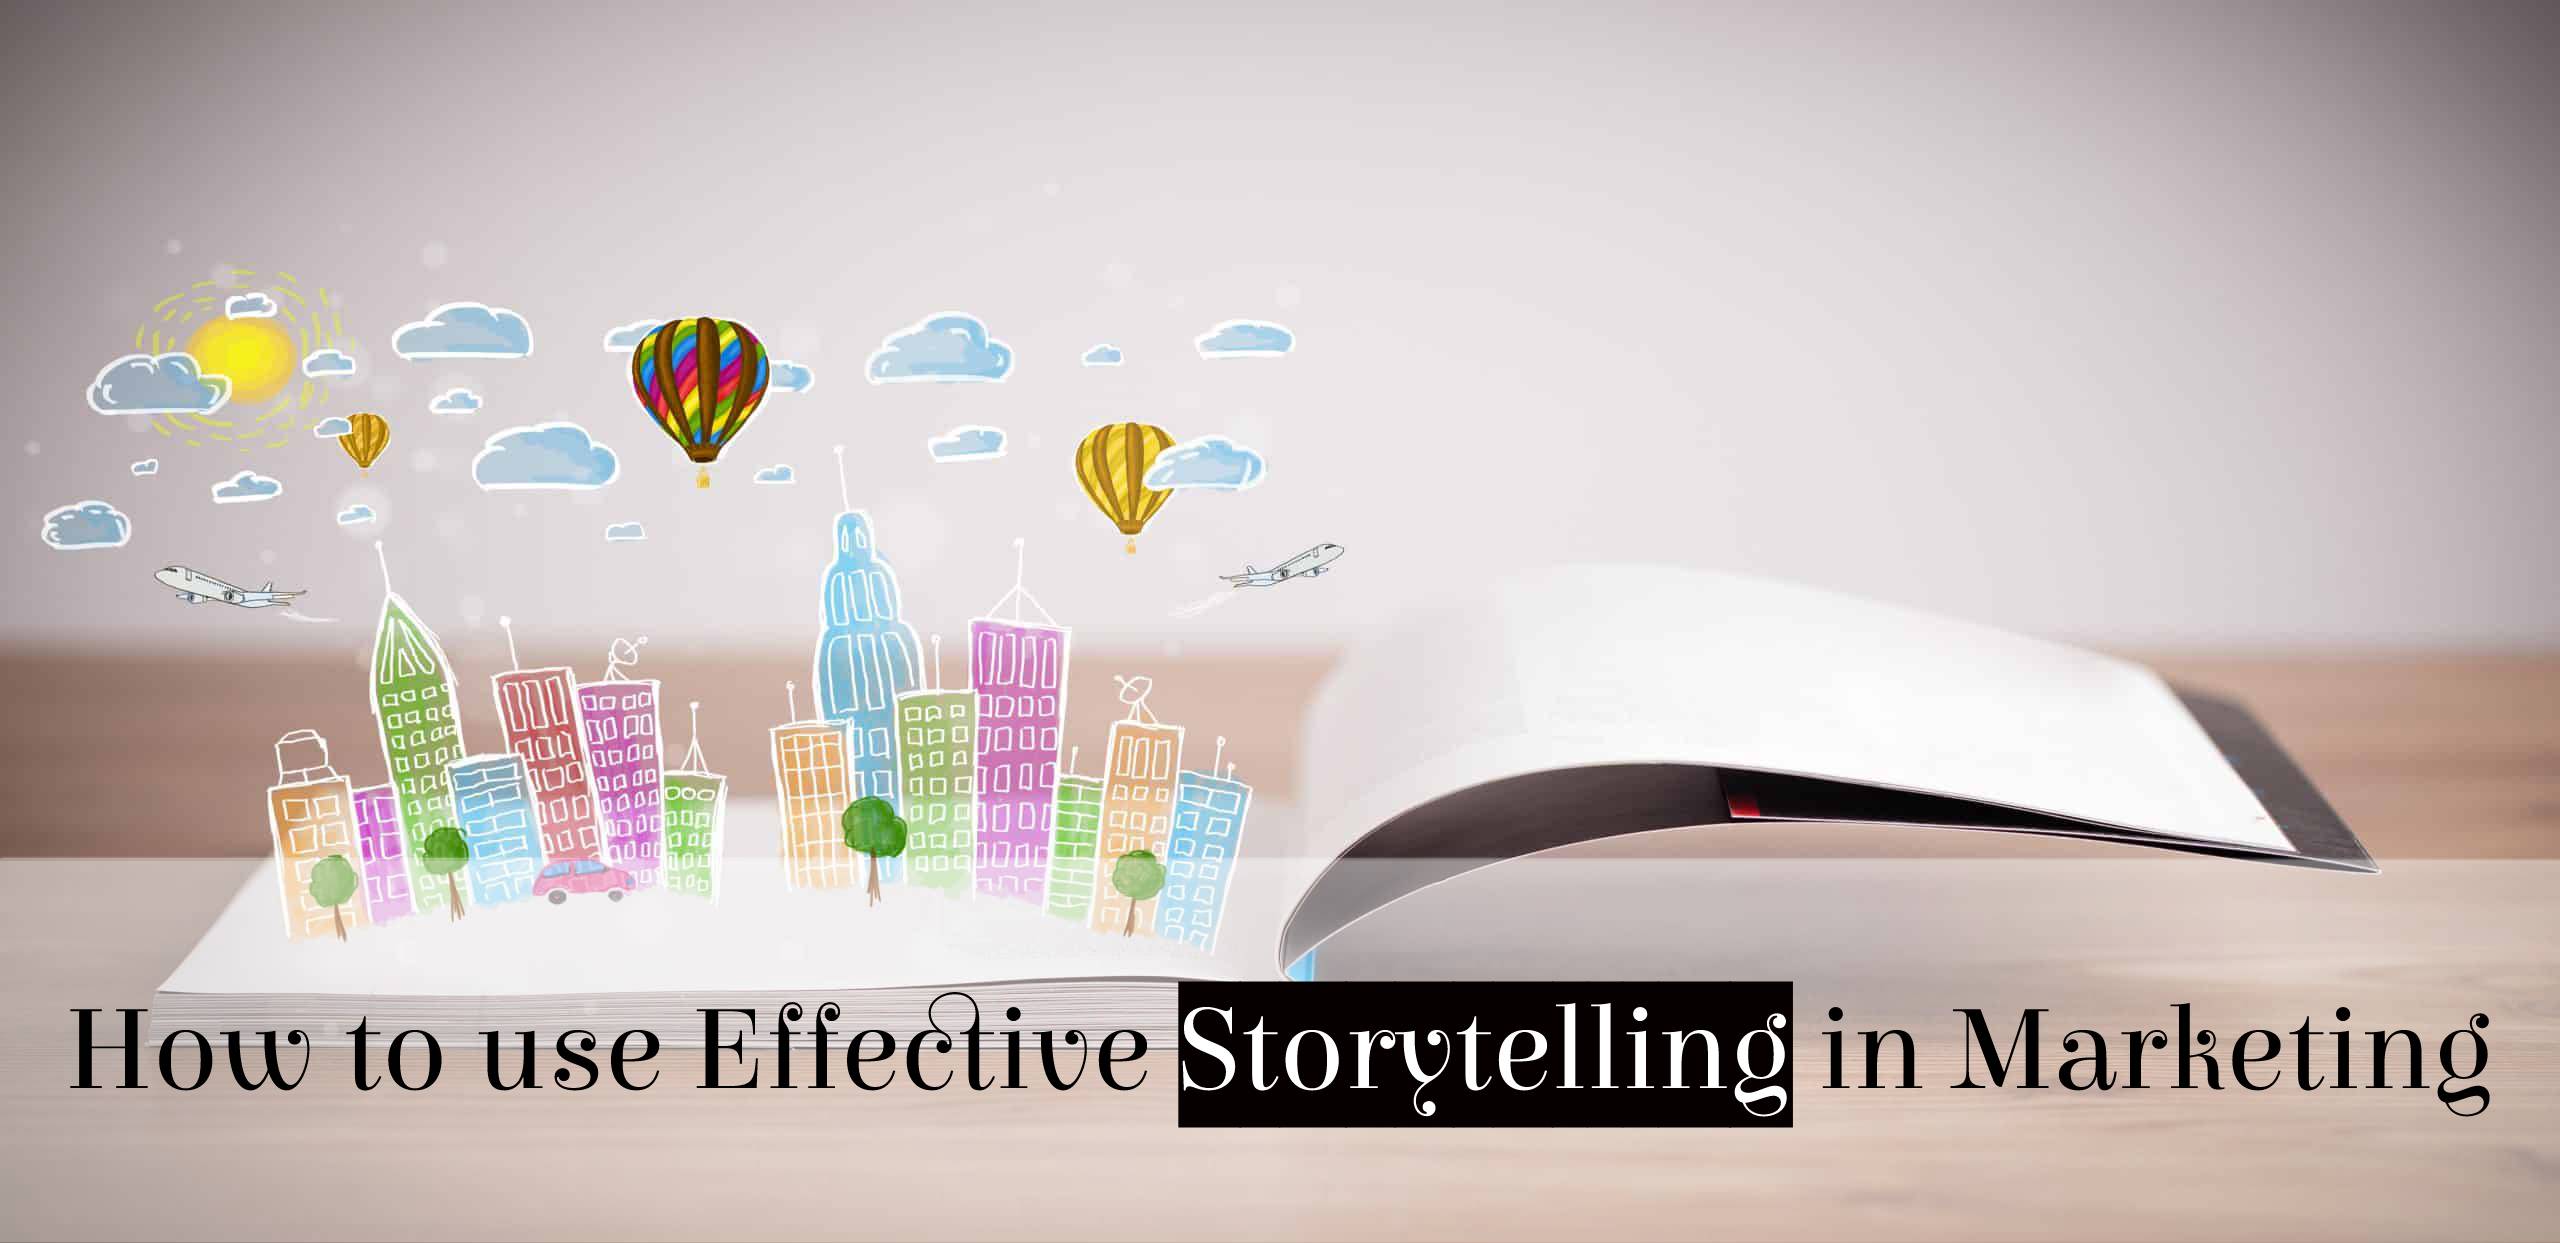 How to use Effective Storytelling in Marketing